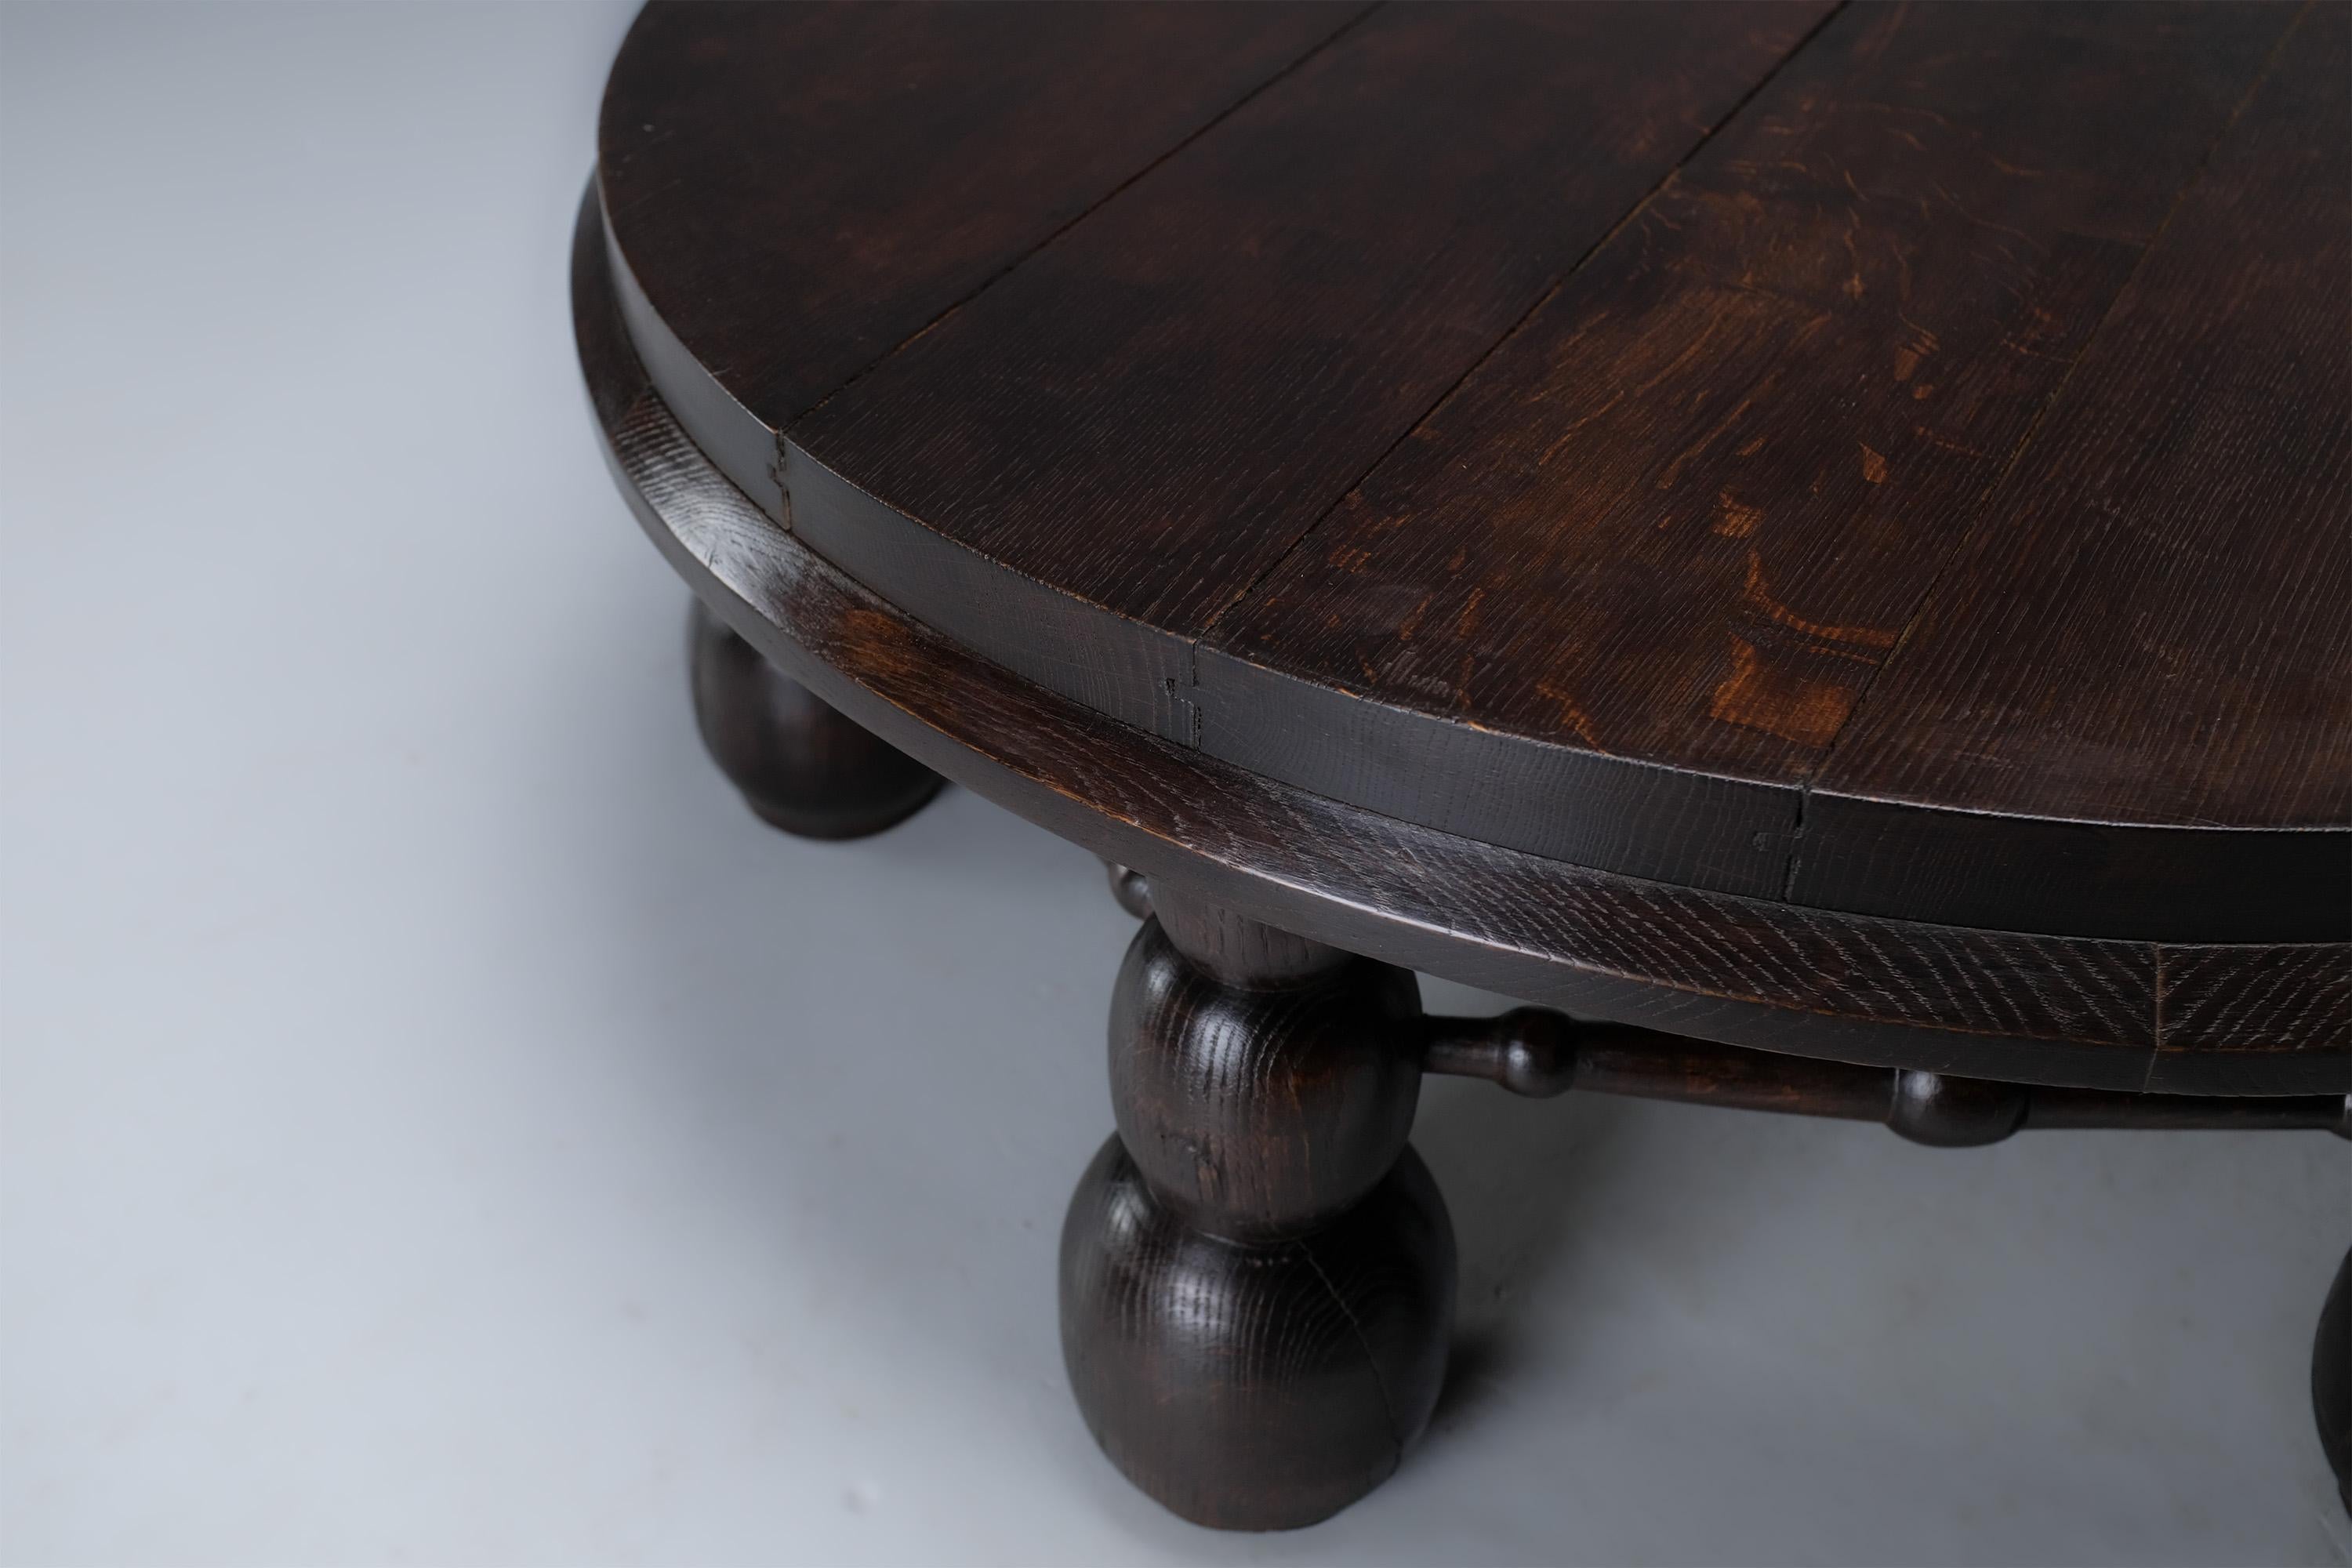 This rare coffee table made of oak shows an art deco style and marks of experience that make its creation estimated to be around the 1930s.

Its robust structure has six wide legs with rounded geometric patterns, which support a thick round